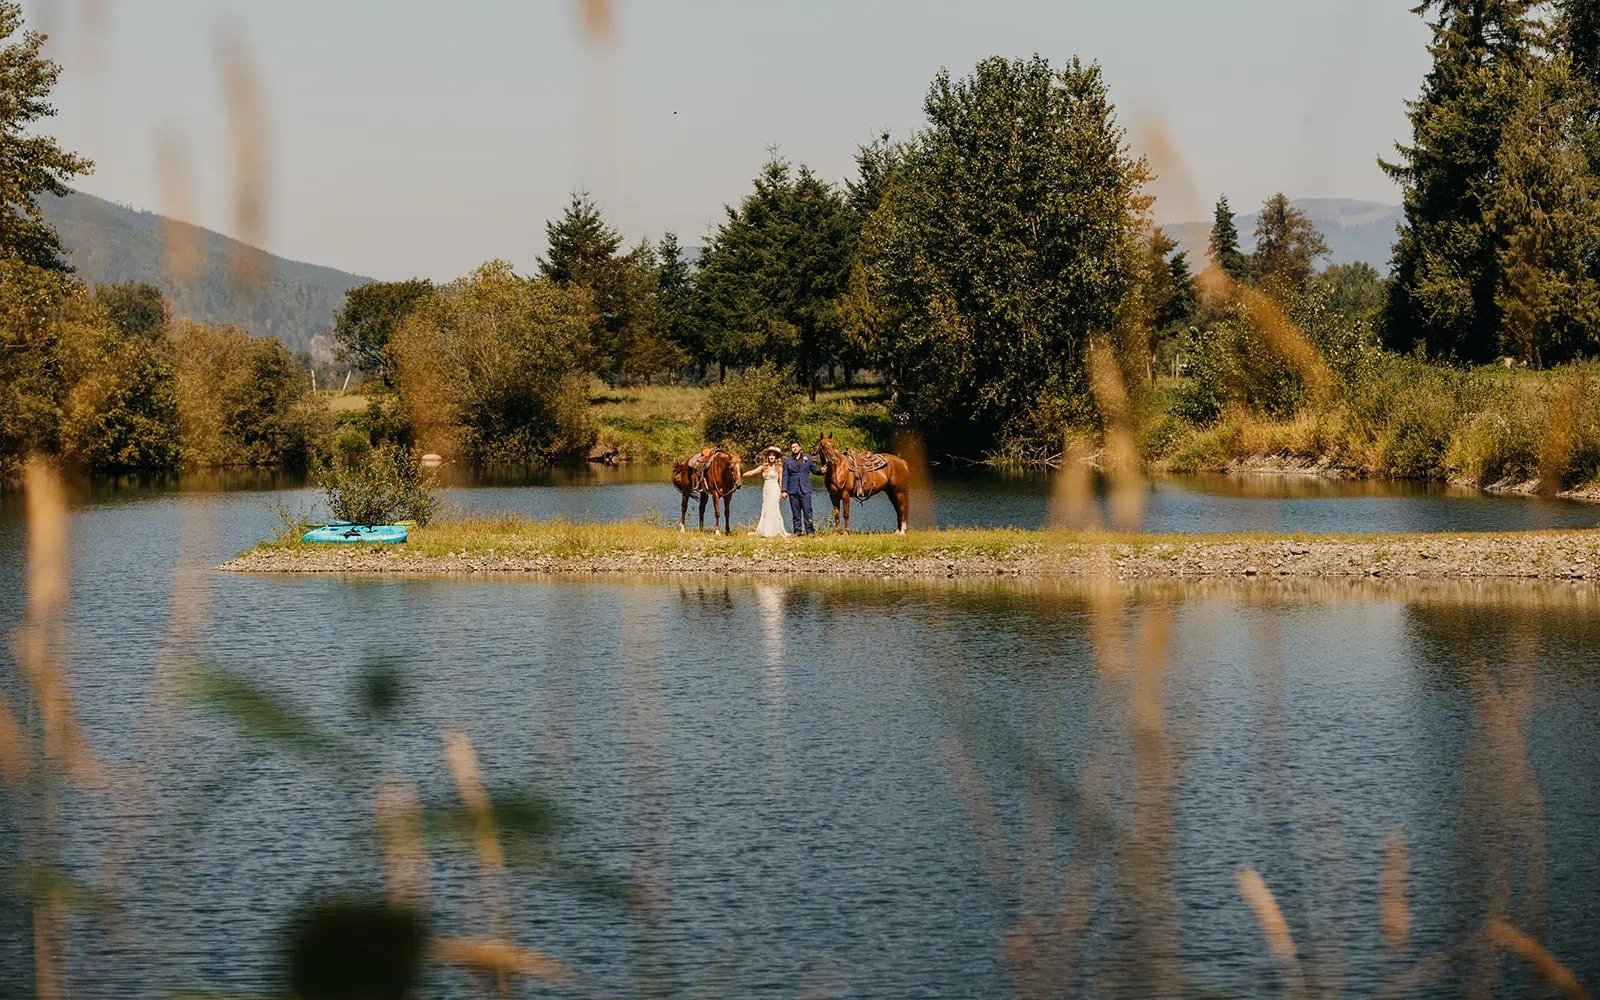 The couple stands with horses by the pond. 